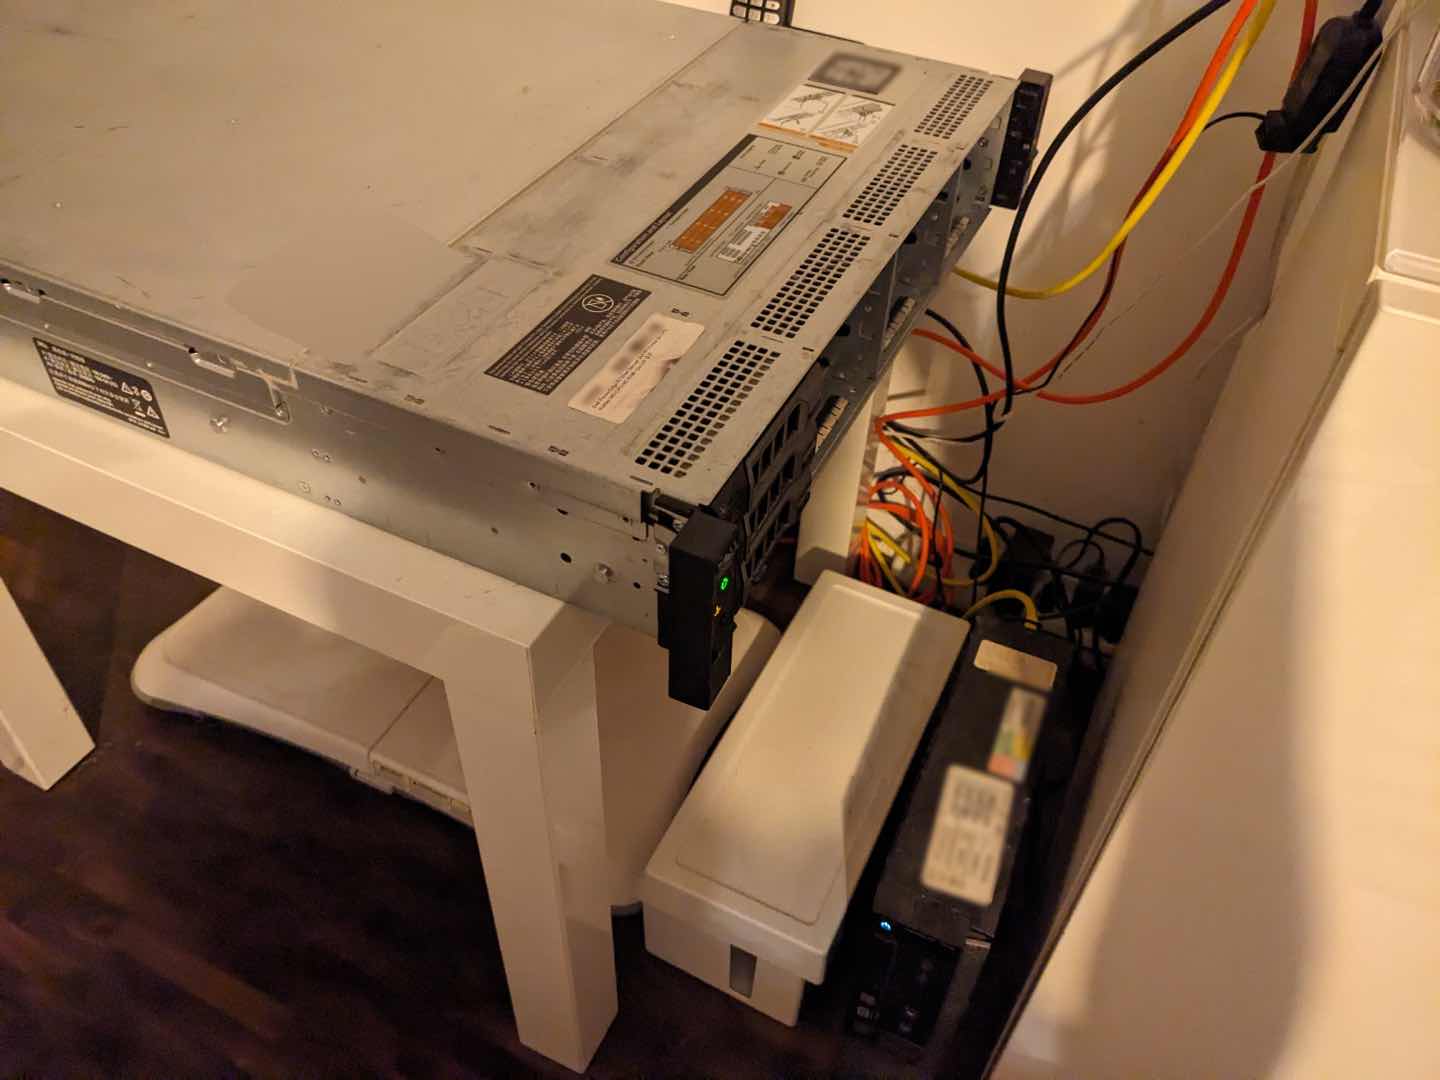 My server resting on an IKEA coffee table next to a TV